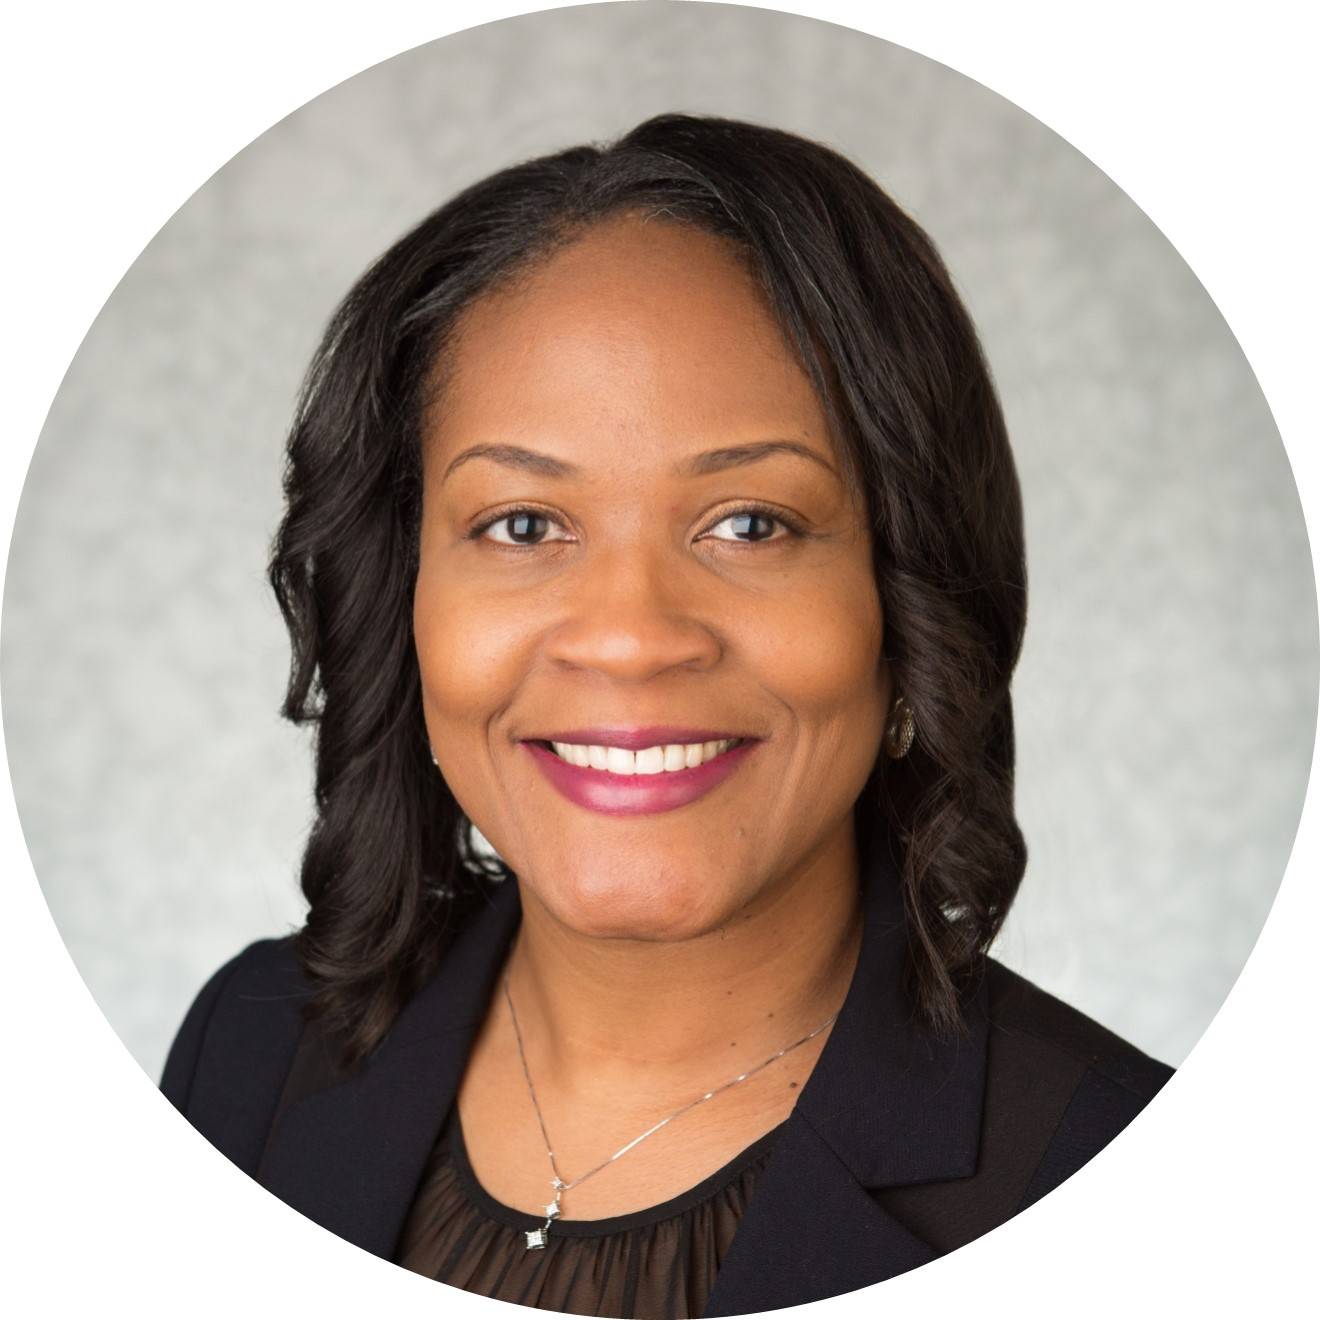 Dr. Shontaye Witcher, Ph.D., smiling for a professional photo